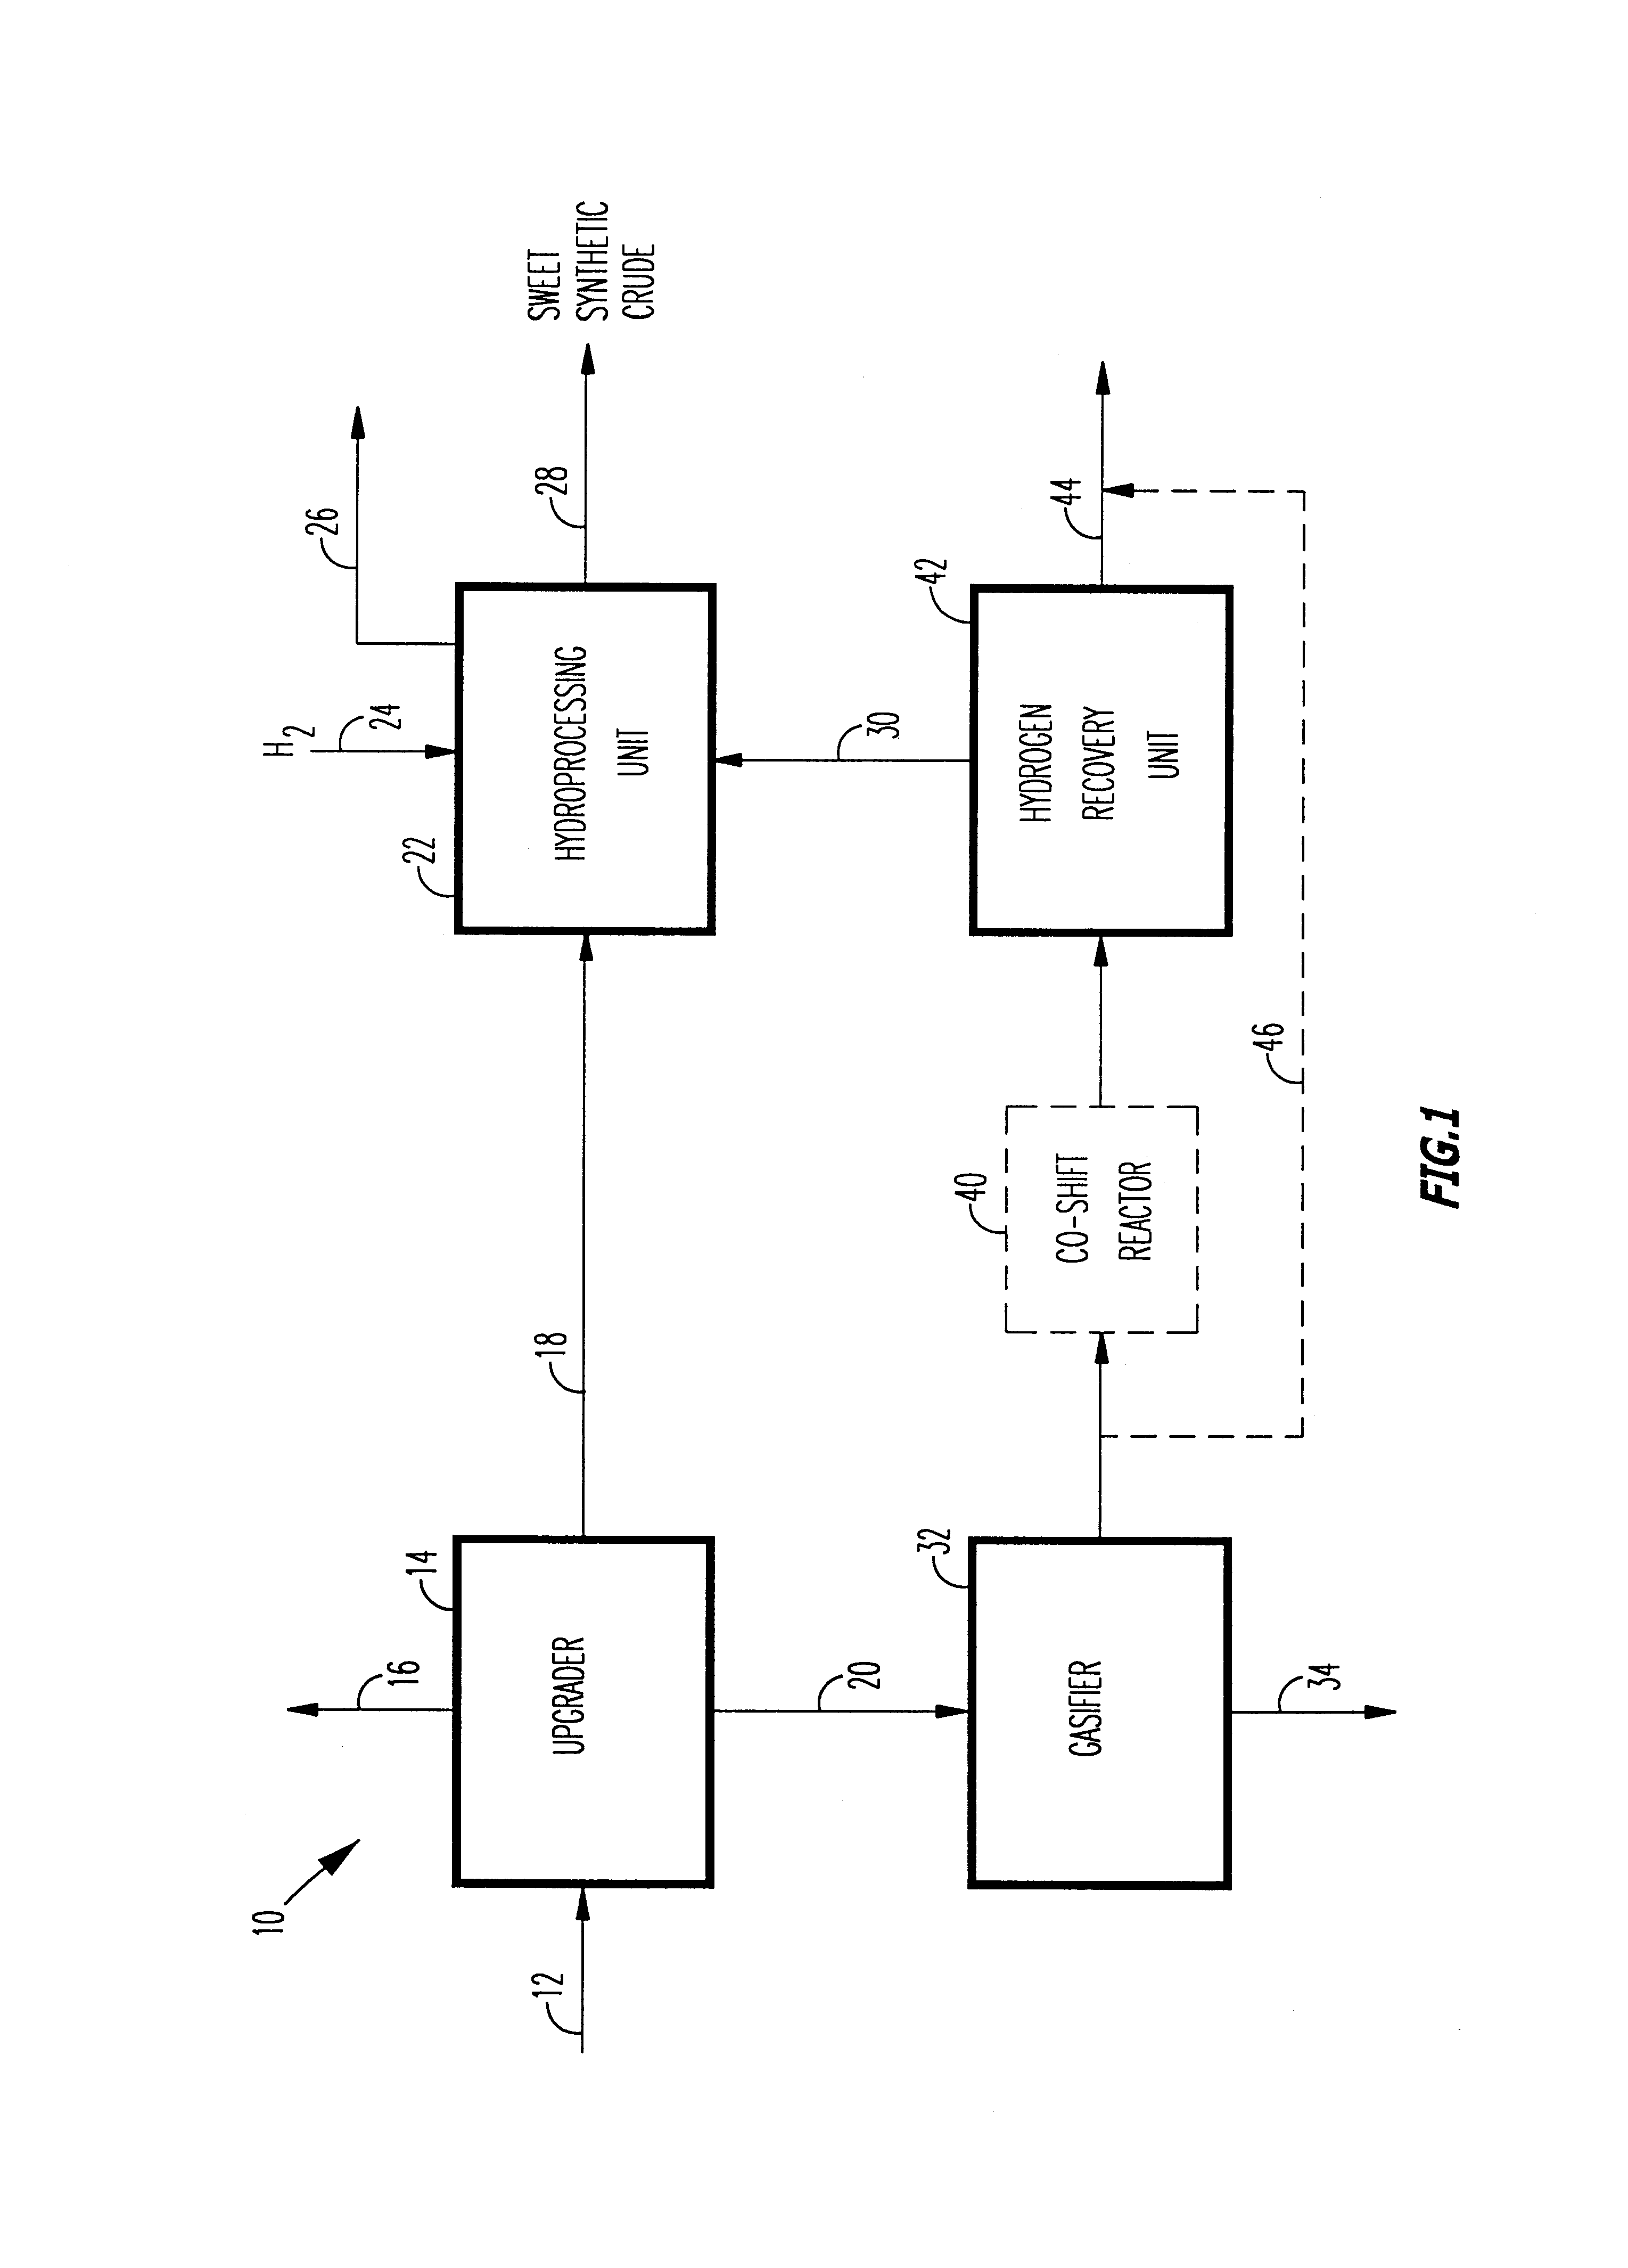 Method of and apparatus for upgrading and gasifying heavy hydrocarbon feeds